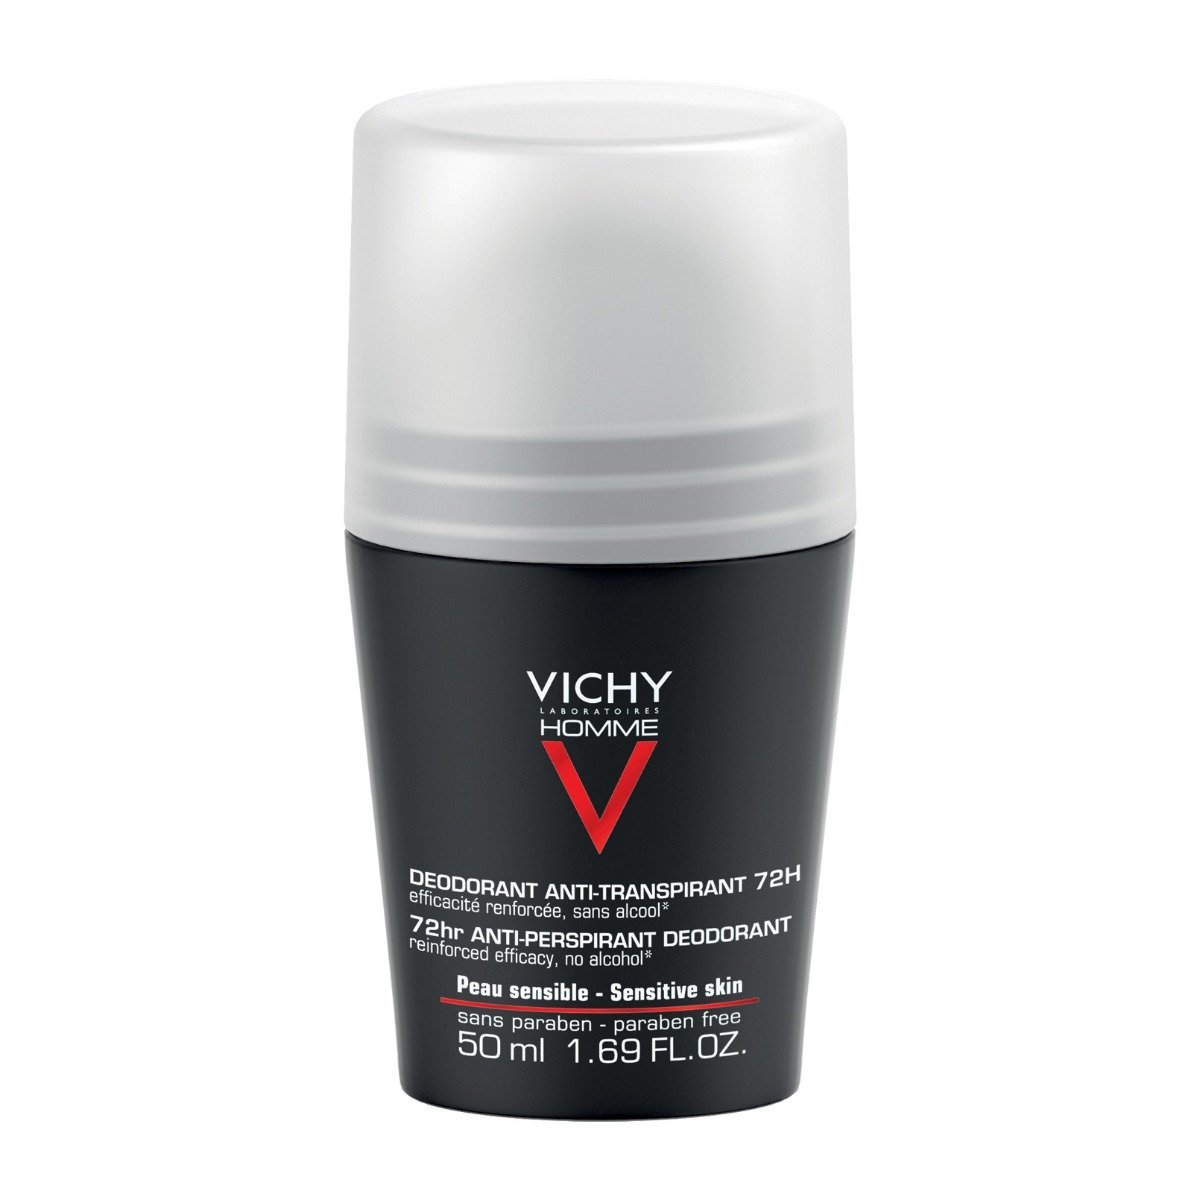 Vichy Homme Extreme Control Roll-On 72H Anti-Perspirant Deodorant - 50ml - Bloom Pharmacy